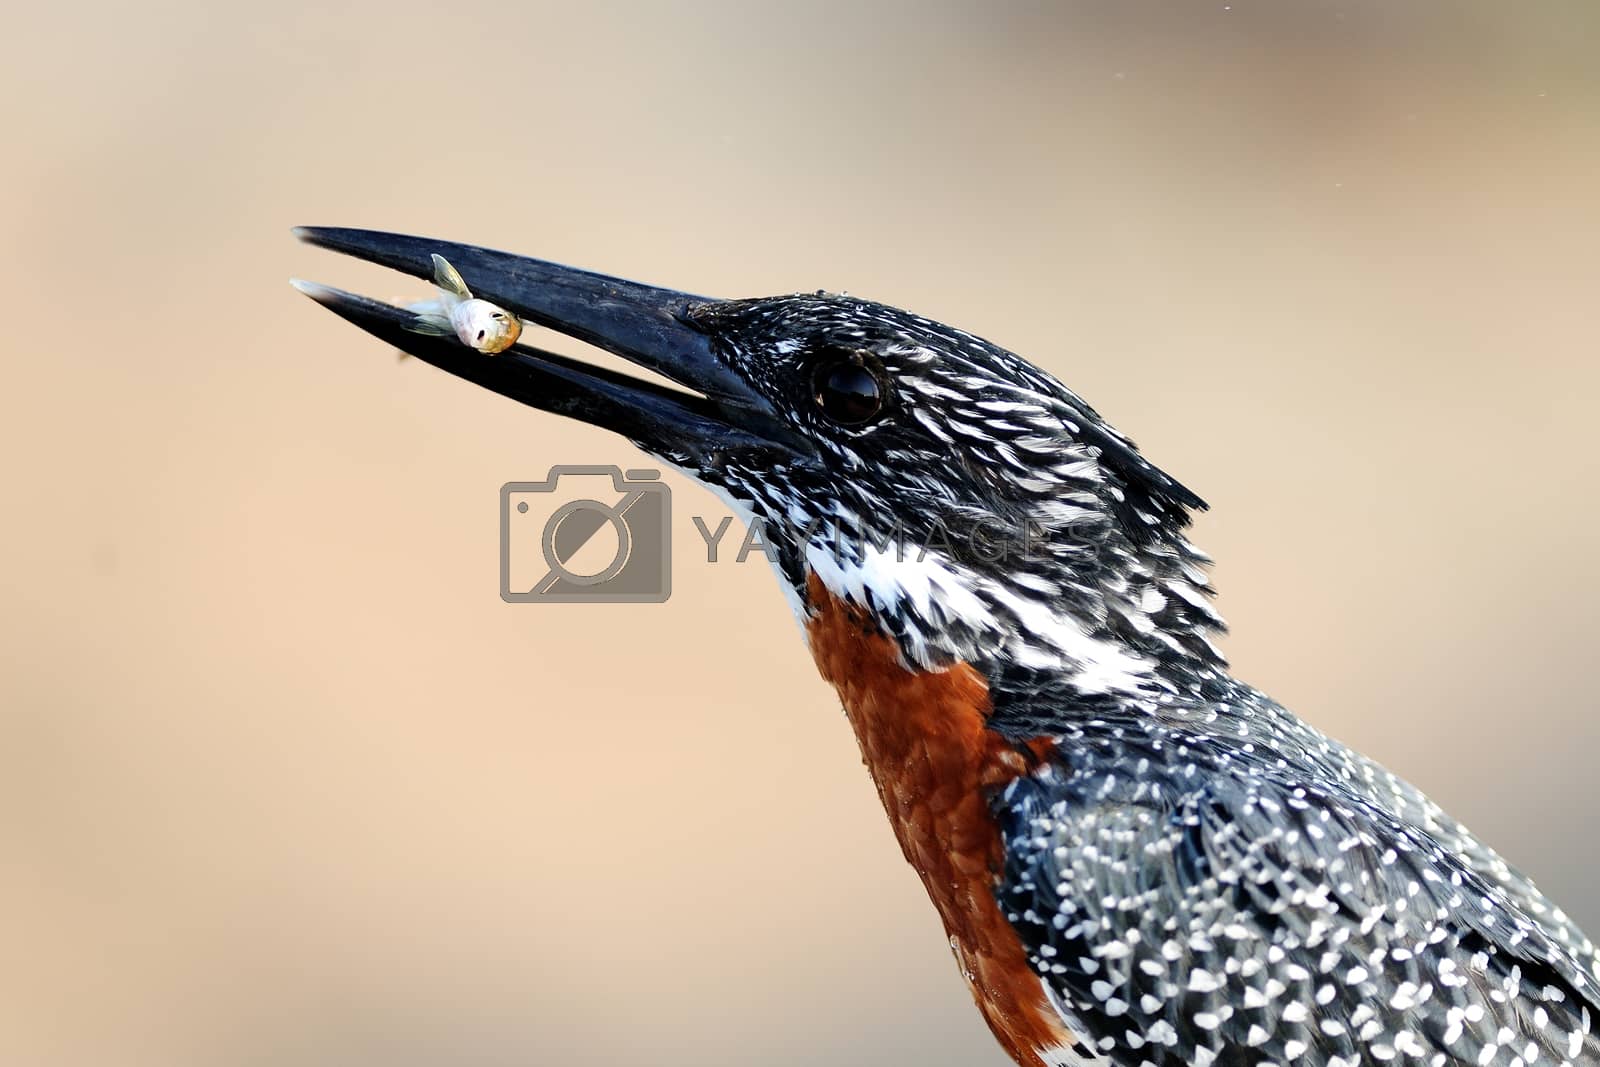 Royalty free image of Giant kingfisher in the wilderness by ozkanzozmen